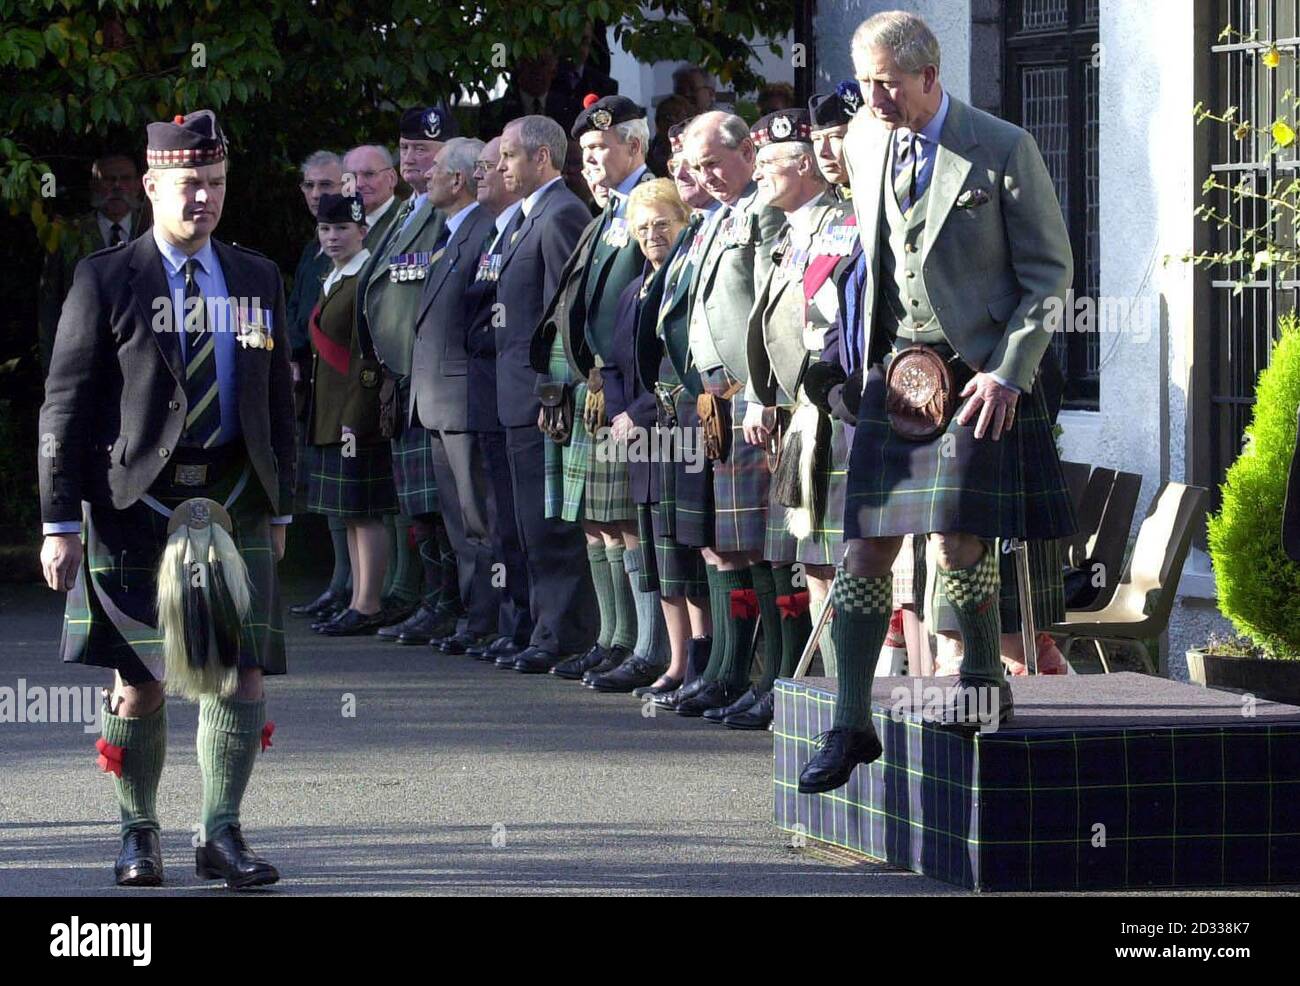 The Prince Of Wales, the Duke of Rothesay, at the Gordon Highlanders Museum in Aberdeen, to view a parade during a ceremony to lay up the Regiment's last colours. Stock Photo